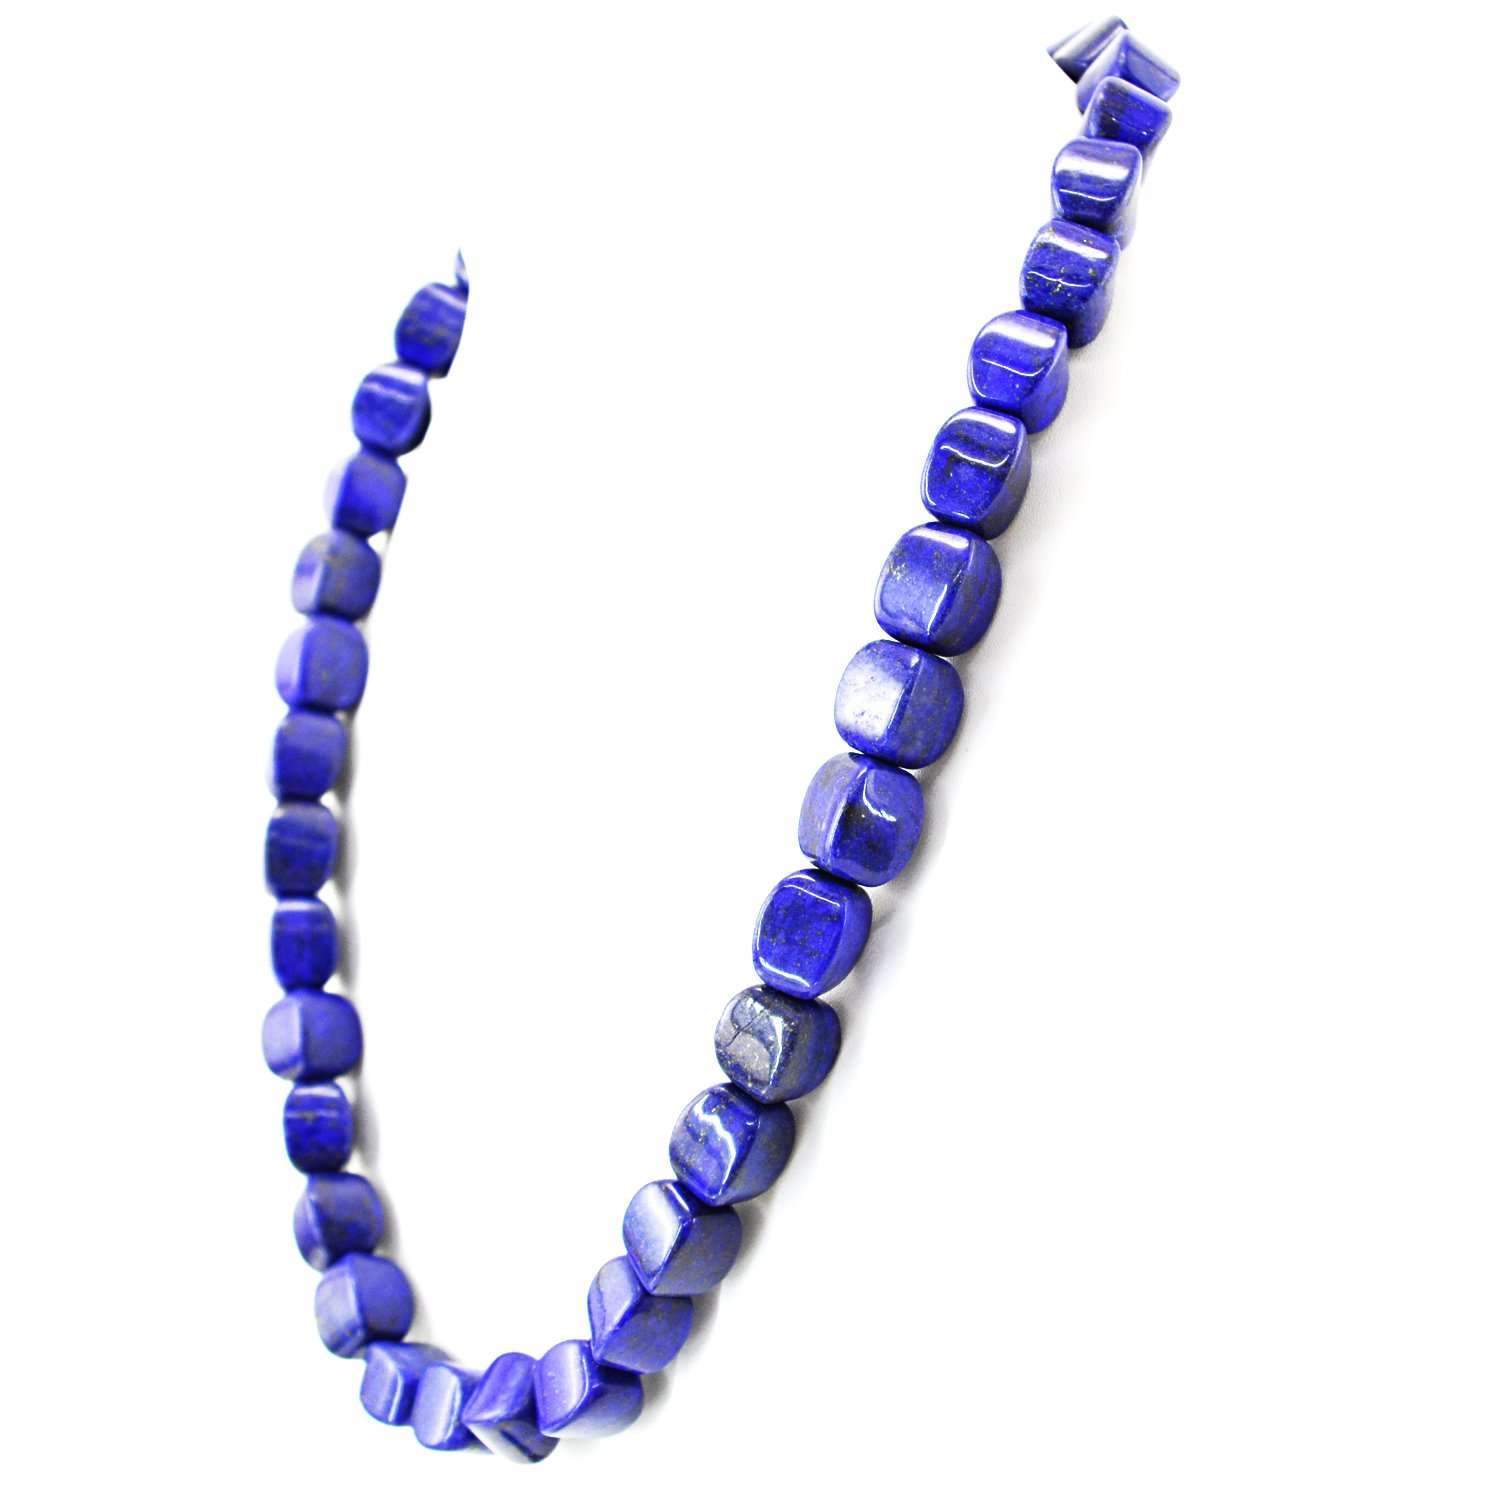 gemsmore:Natural Blue Lapis Lazuli Necklace 20 Inches Long Untreated Beads